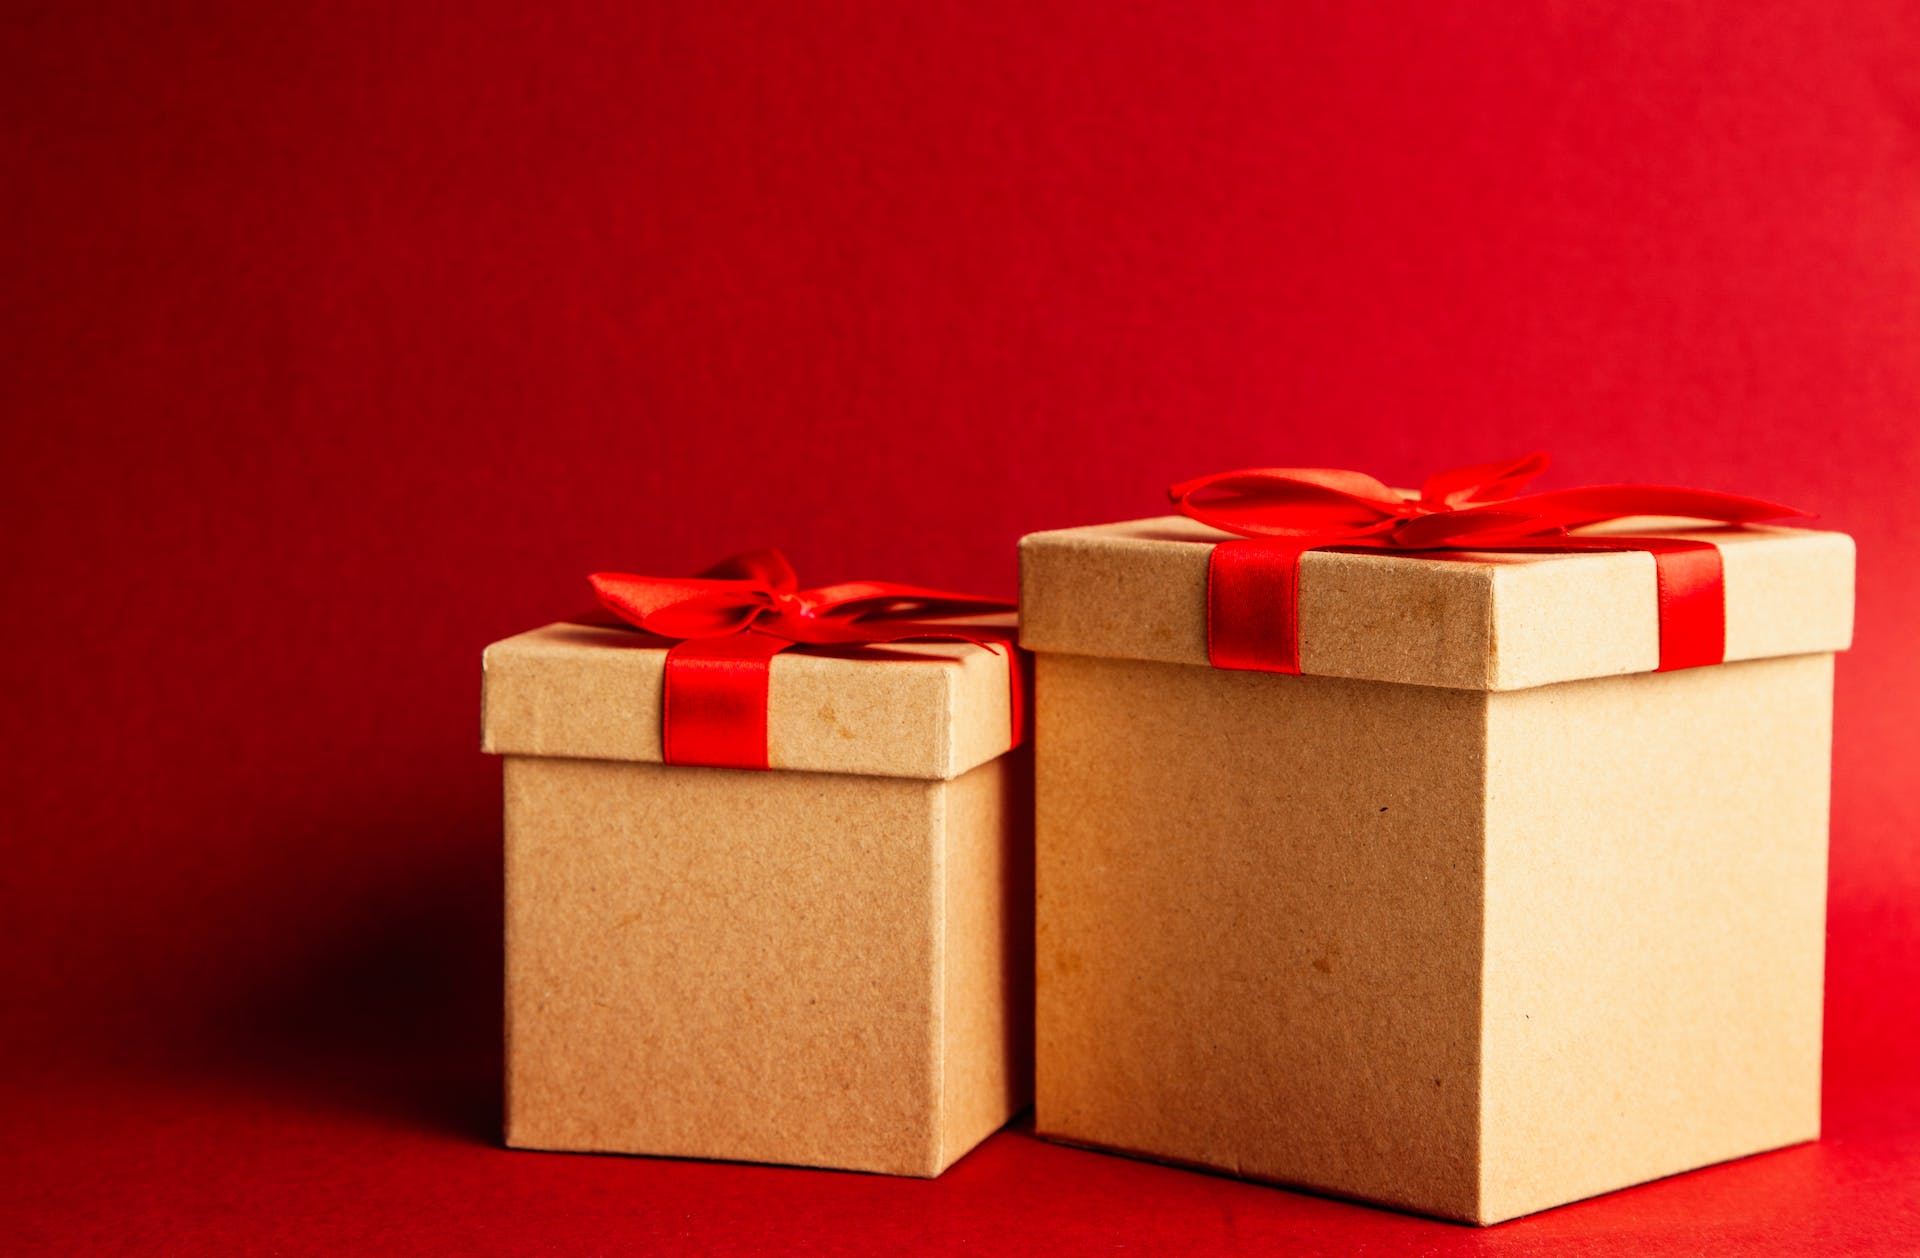 two wrapped presents against a red background